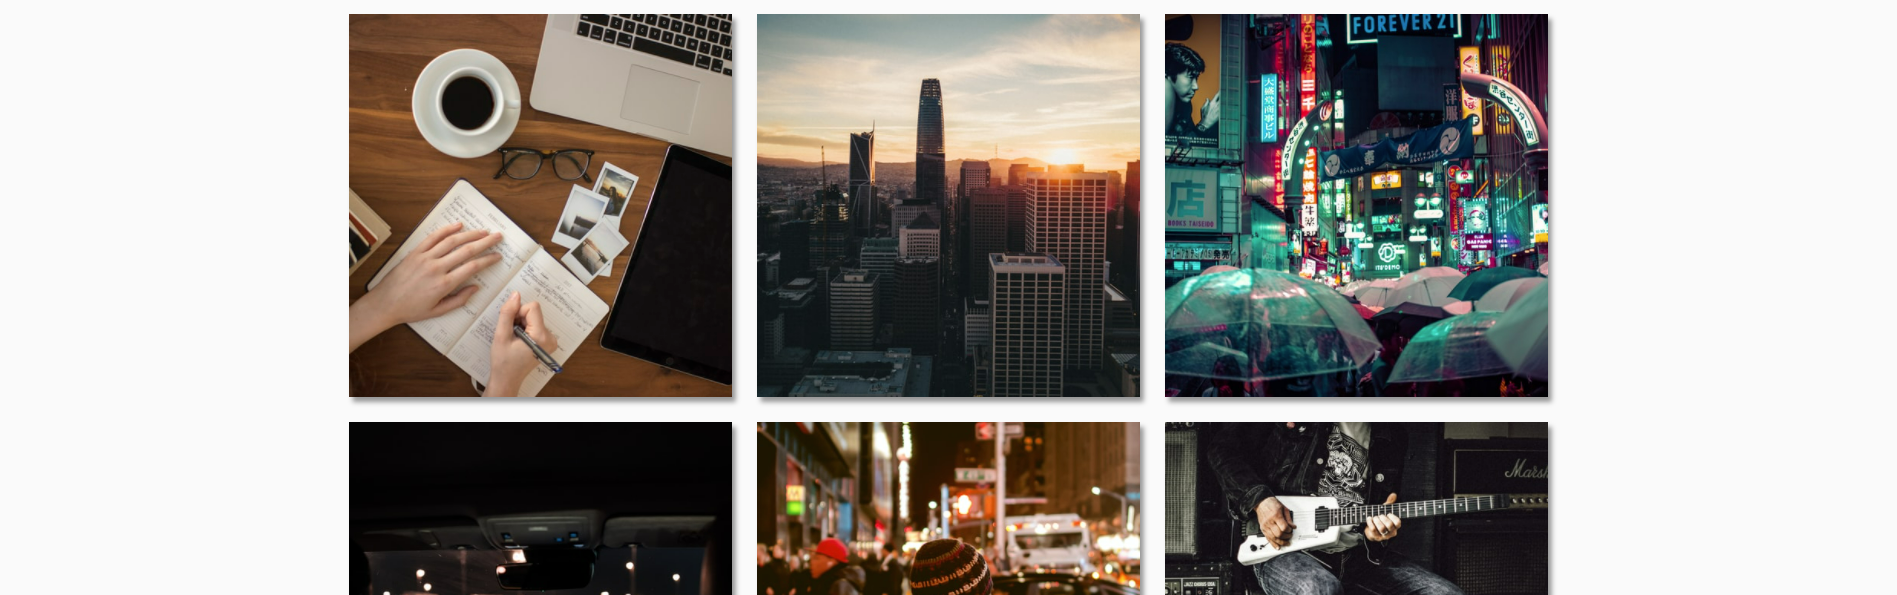 Image Gallery Grid and CSS Flexbox Fallback